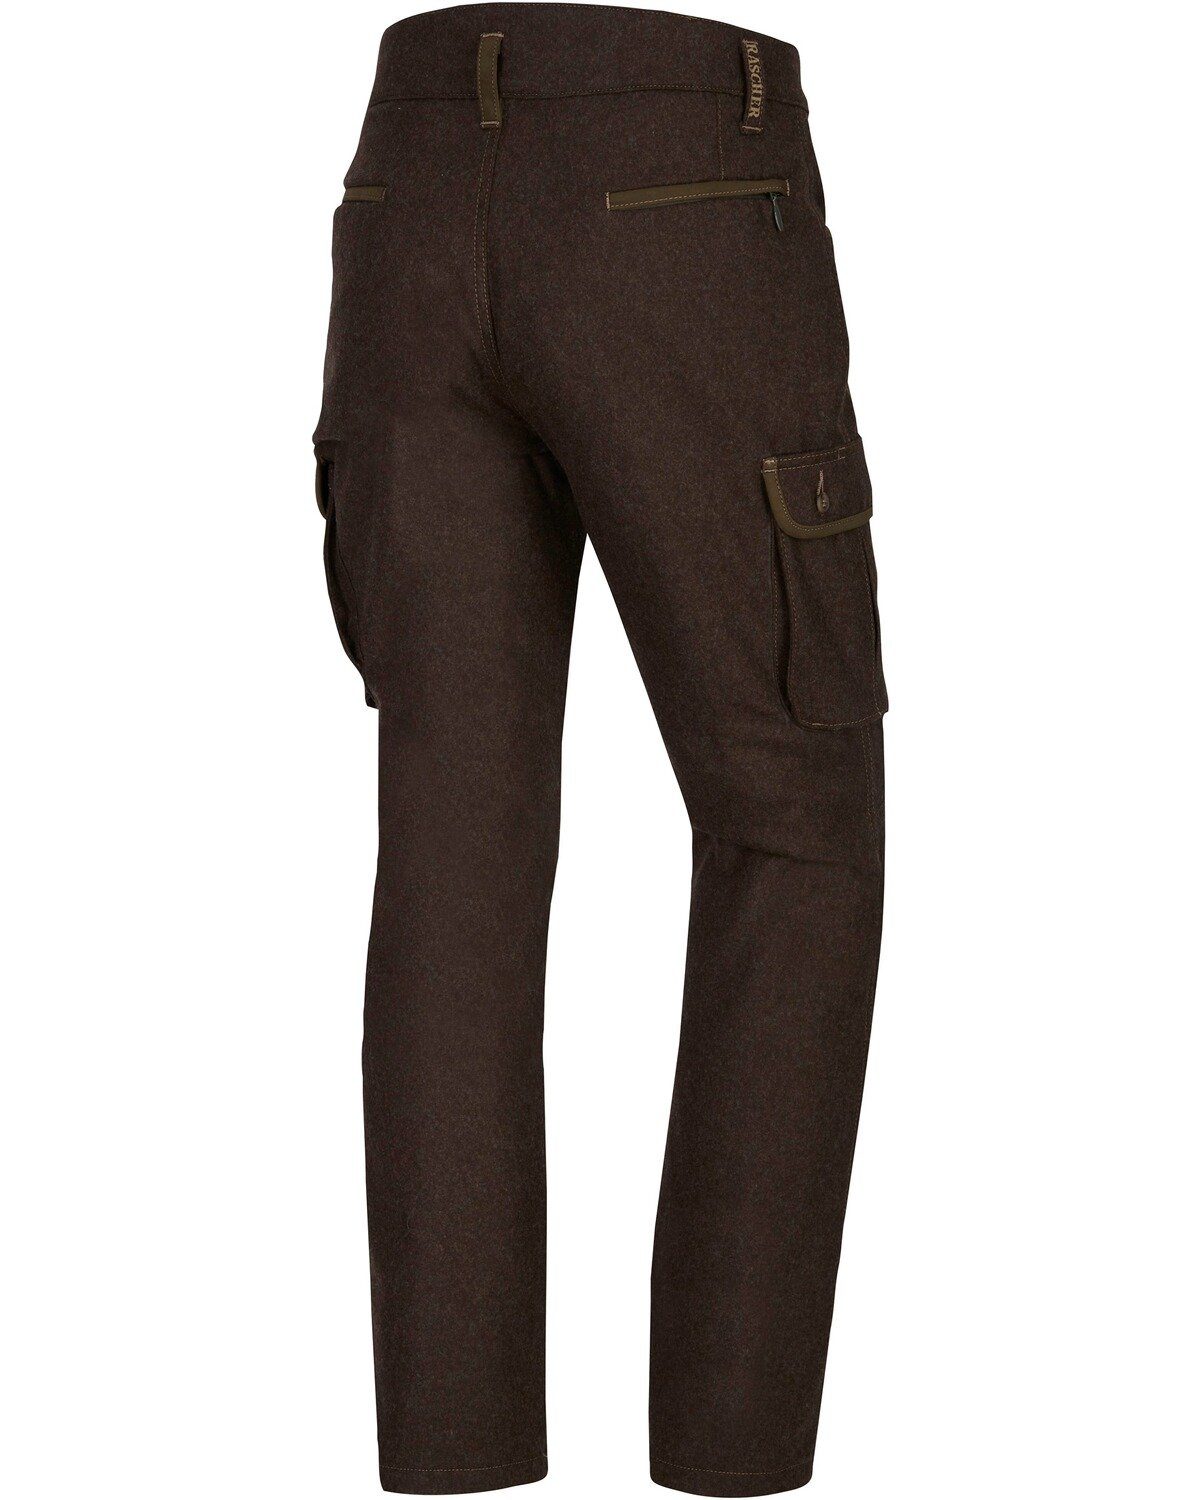 Rascher Thermo-Lodenhose Outdoorhose